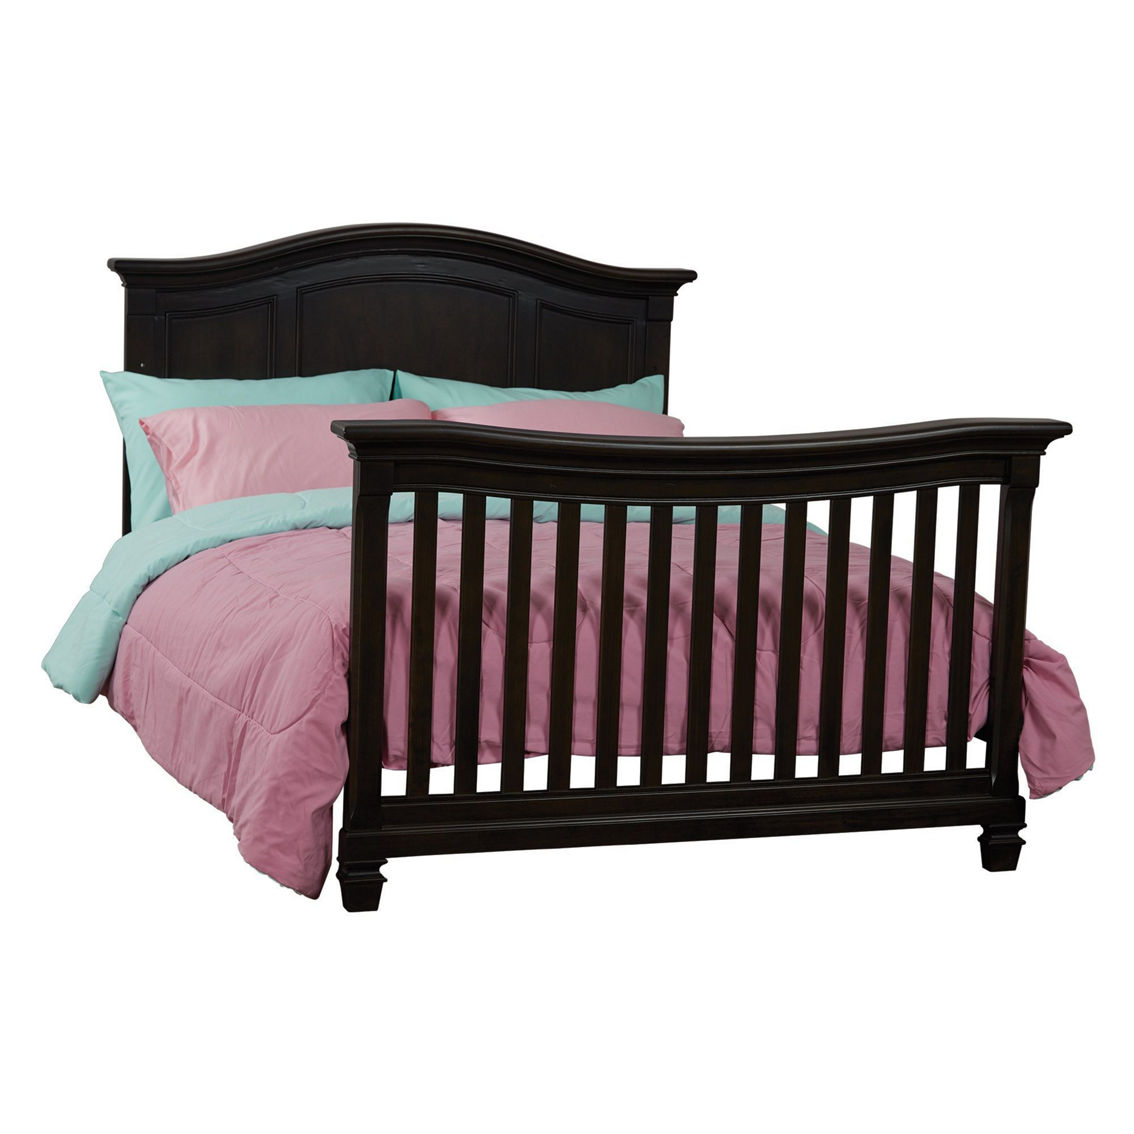 Baby Cache Glendale 4-in-1 Convertible Crib Charcoal Brown - Image 5 of 5